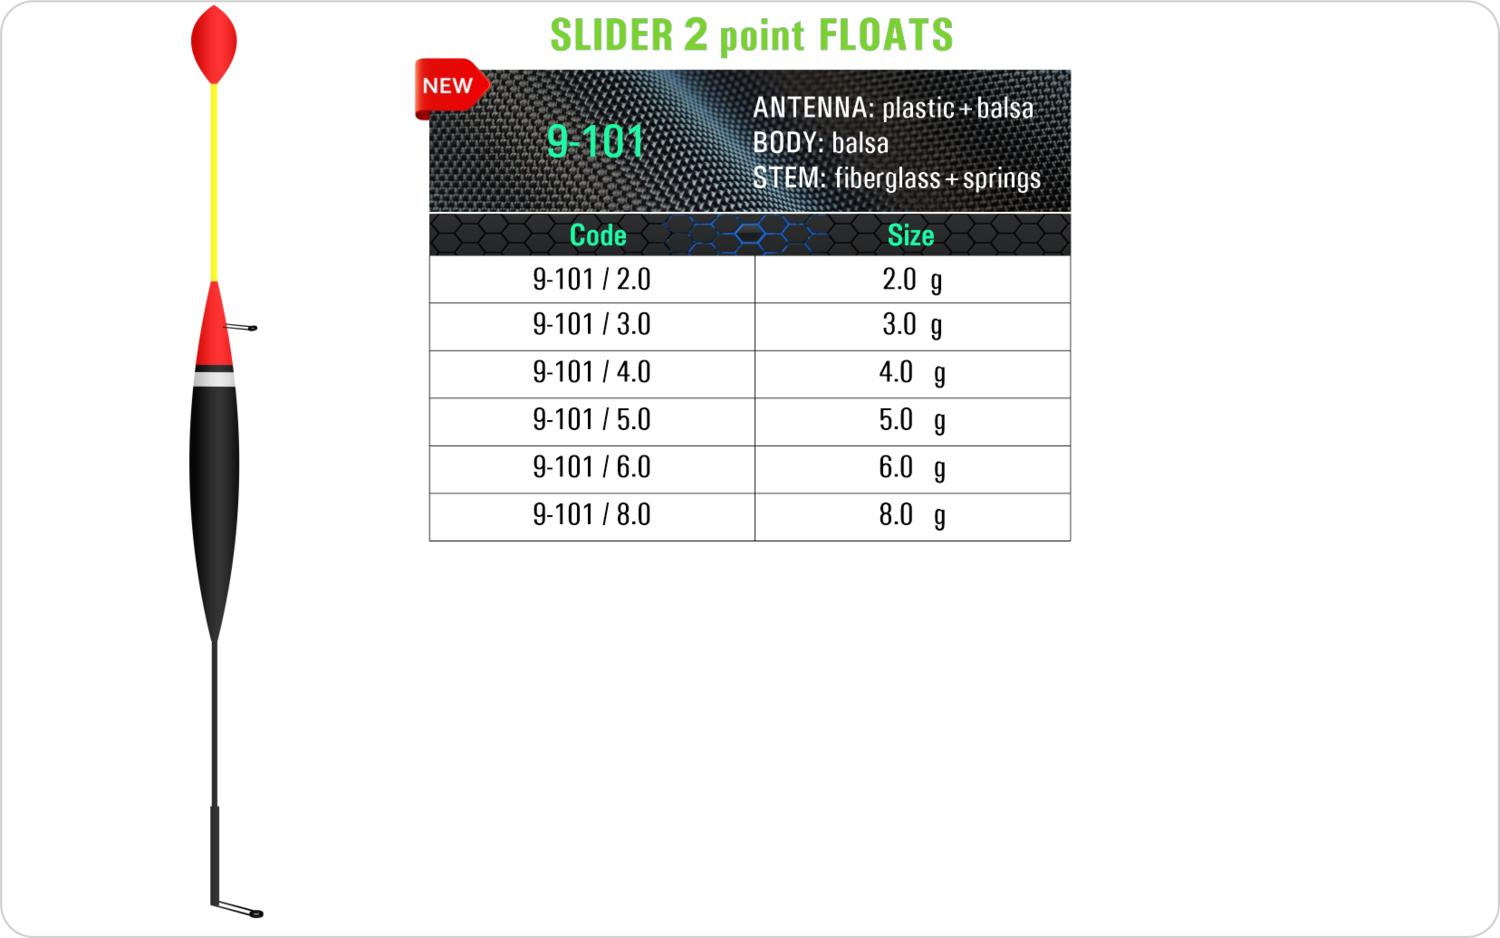 SF 9-101 - Lake and river float model and table containing an additional information about this float with different codes, sizes, types of the body, the stem and the antenna of the float.